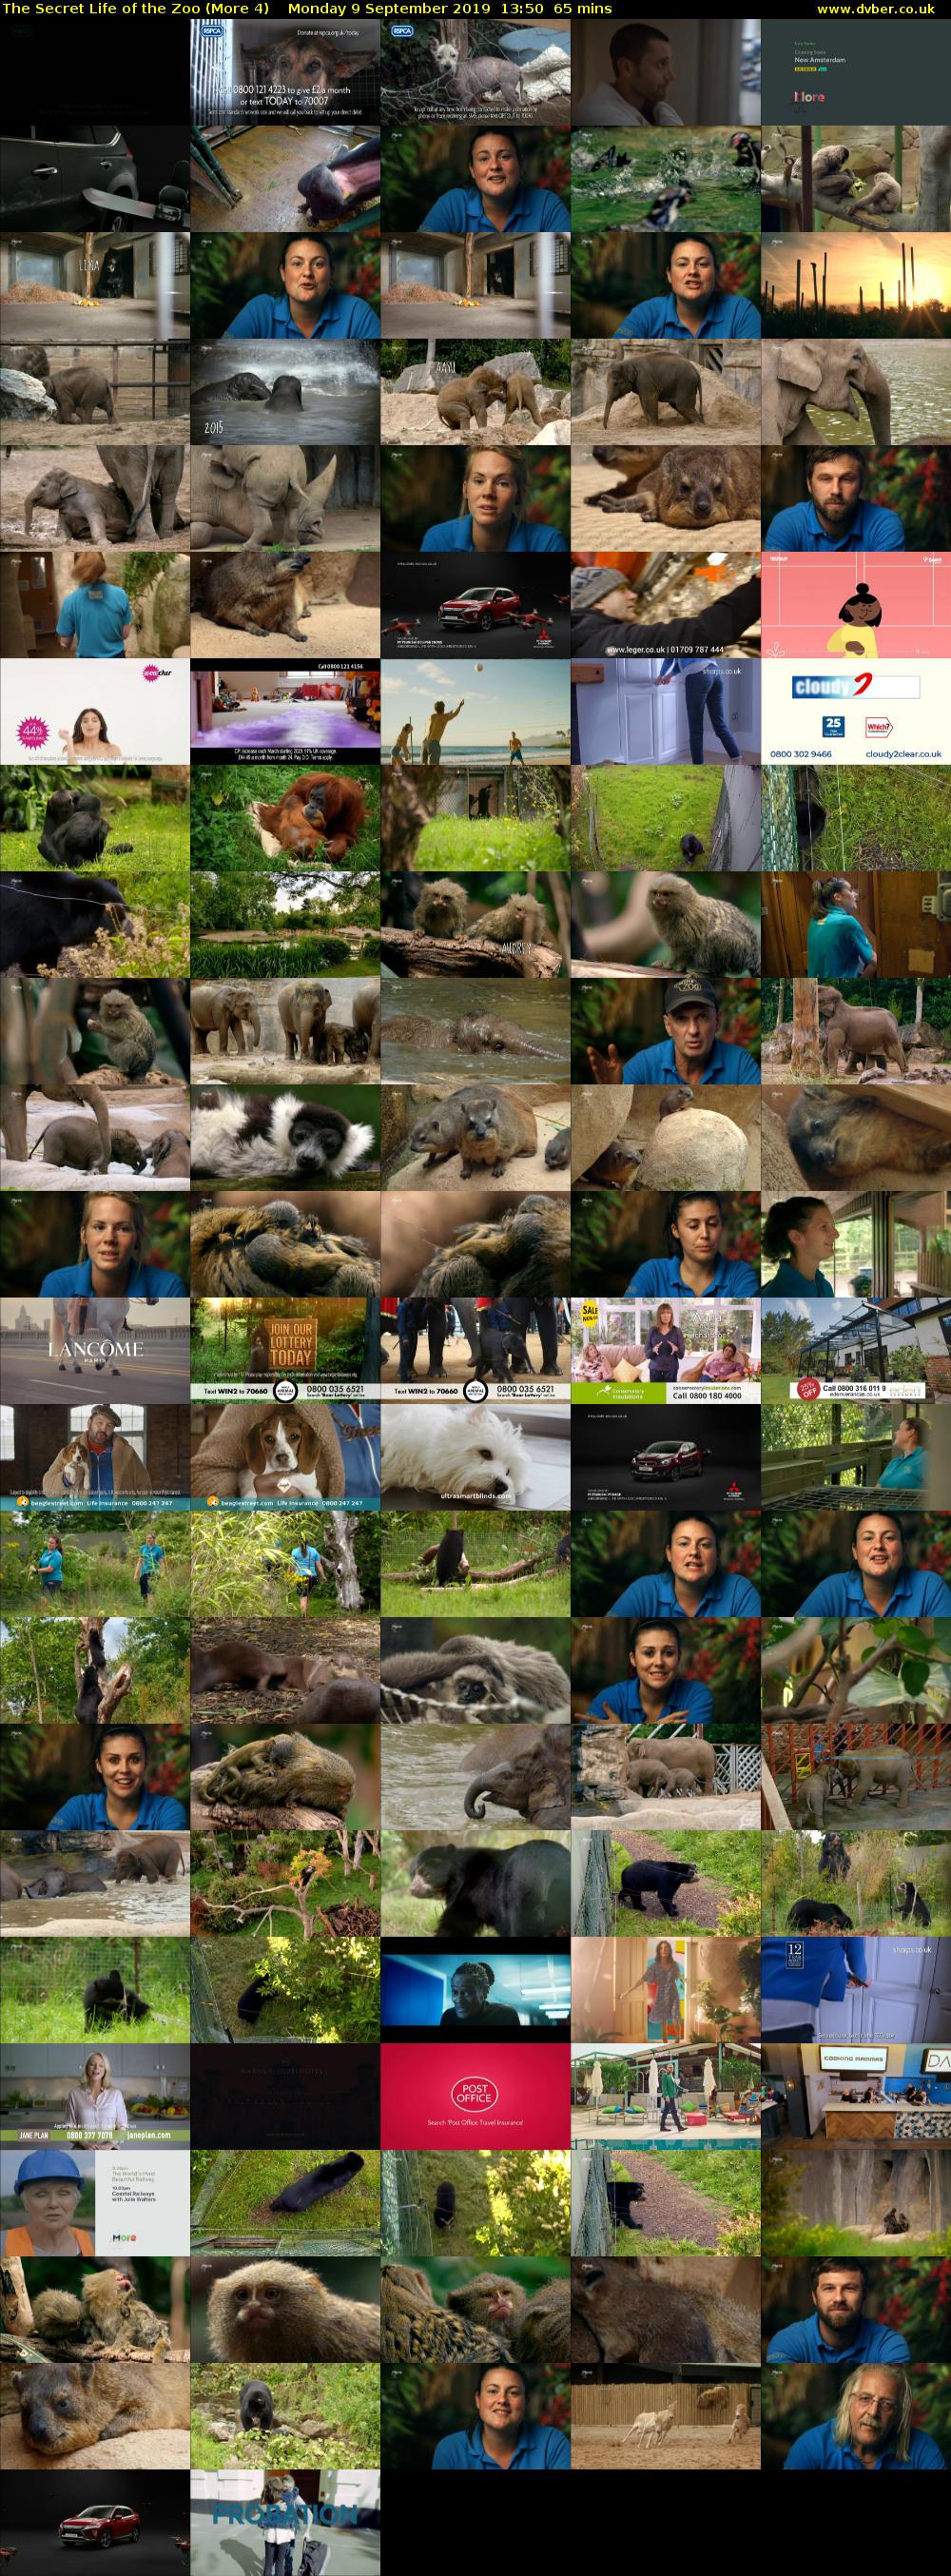 The Secret Life of the Zoo (More 4) Monday 9 September 2019 13:50 - 14:55